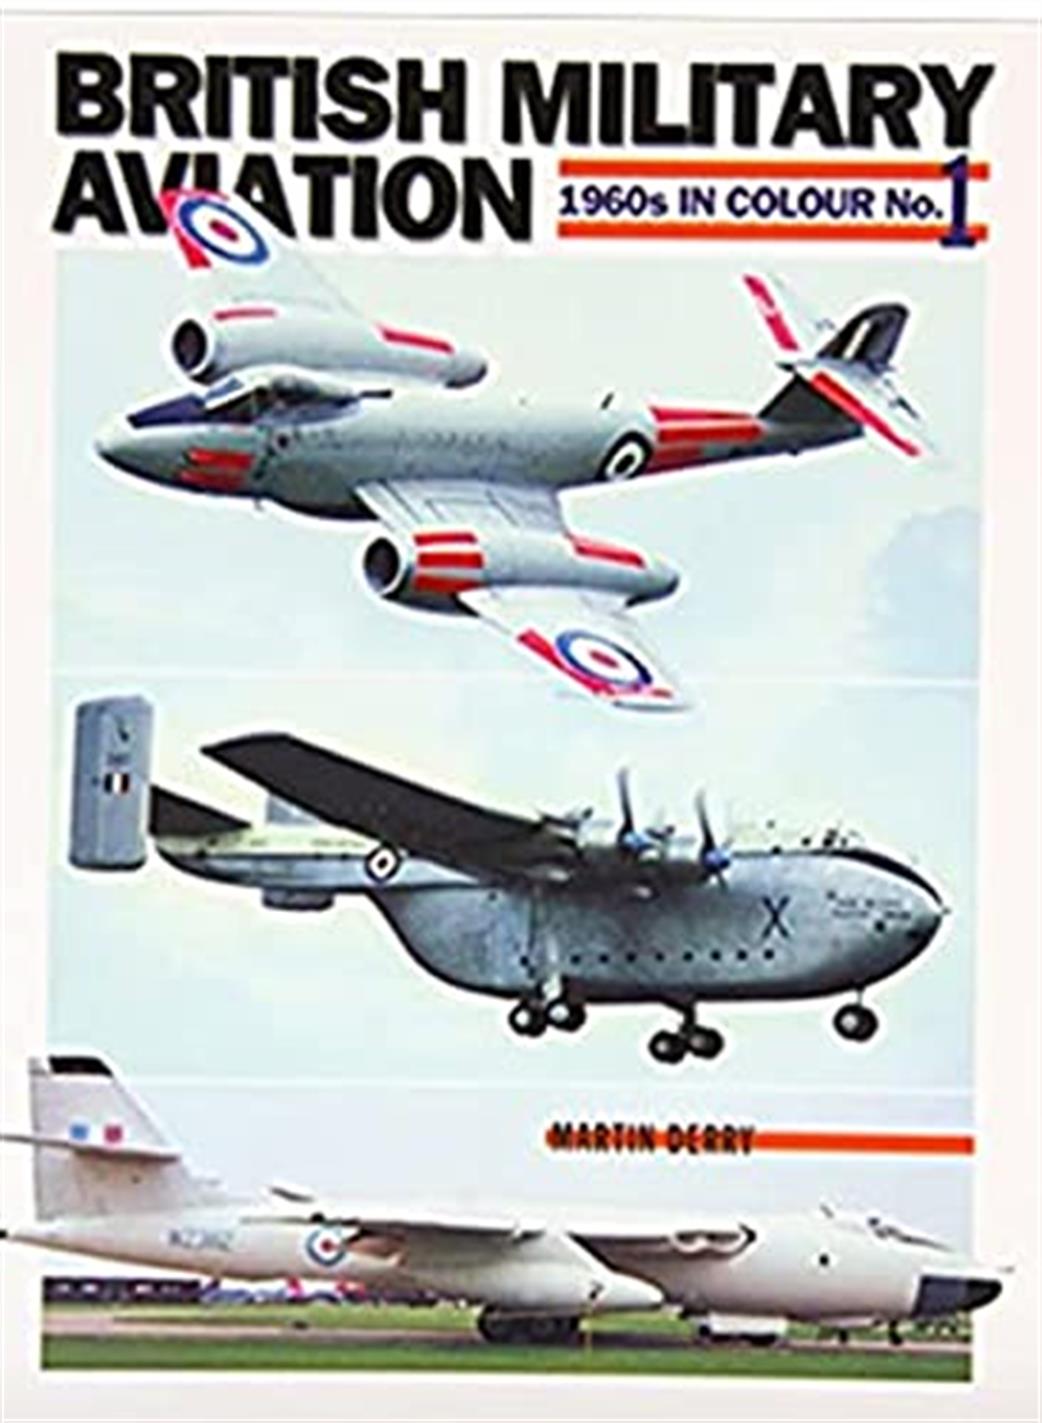 9781905414093 British Military Aviation 1960's in Colour Book by Martin Derry